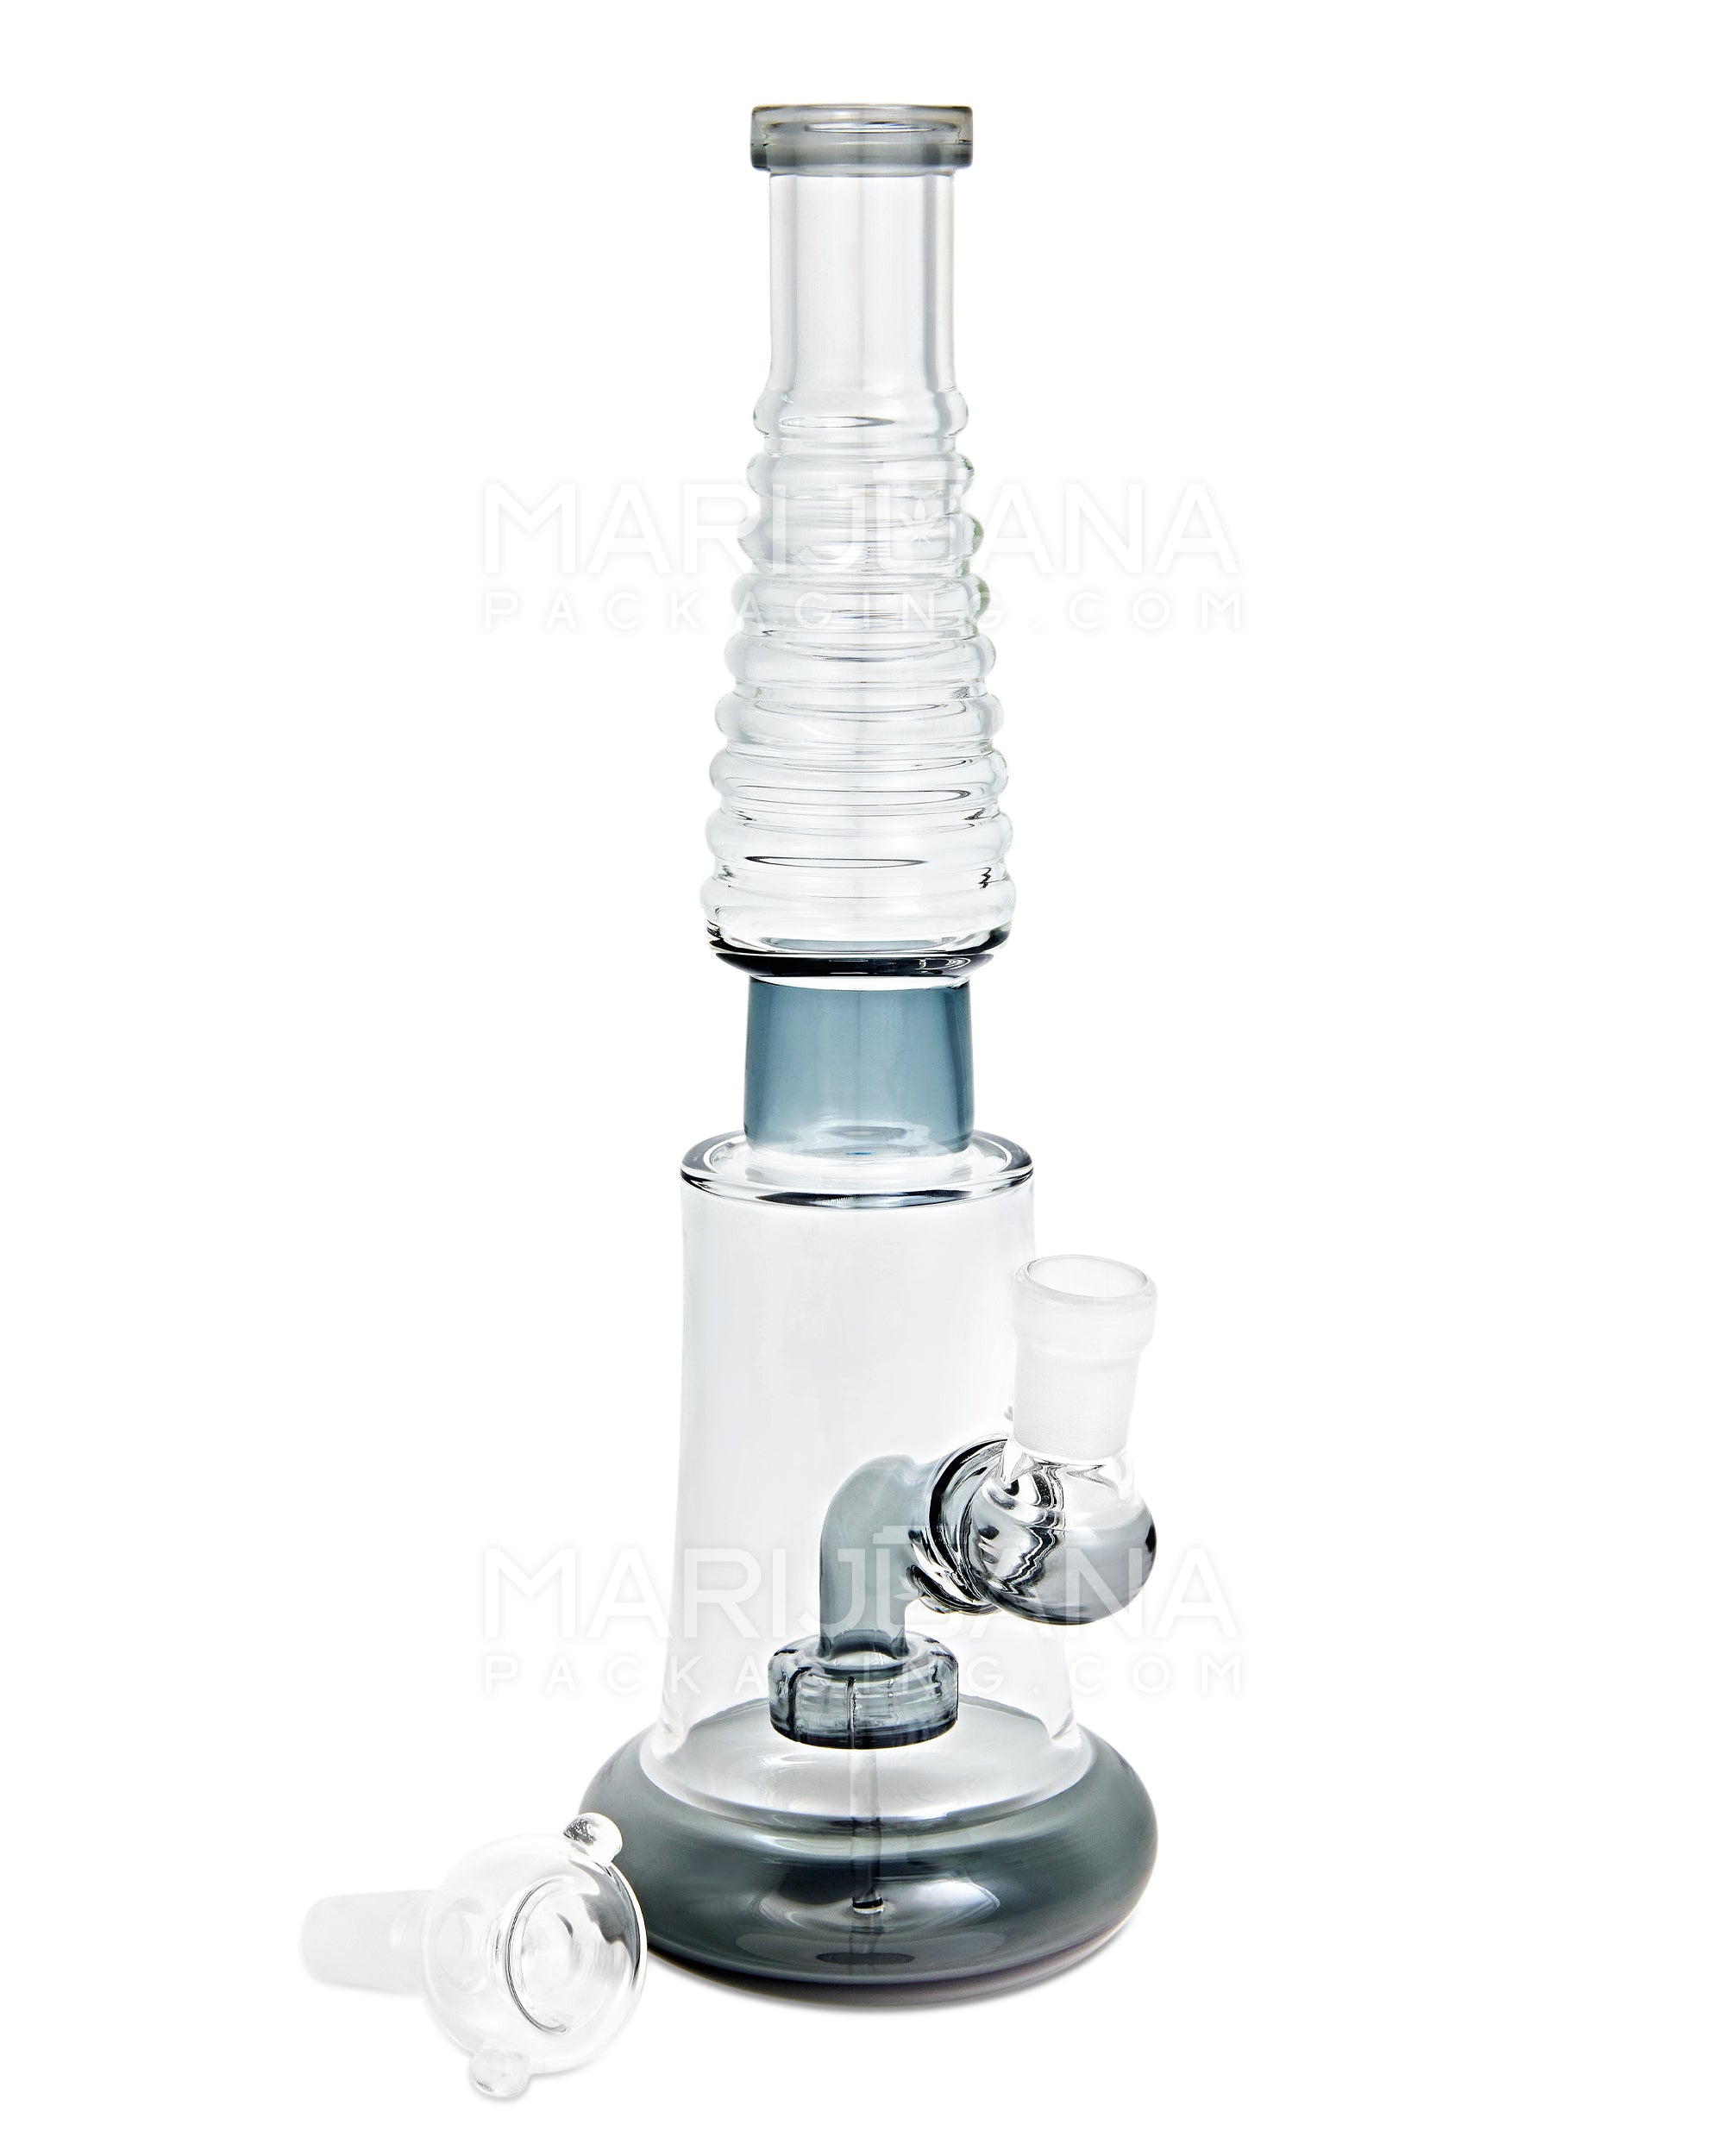 Ribbed Neck Showerhead Perc Glass Water Pipe w/ Donut Base | 10in Tall - 14mm Bowl - Smoke - 2